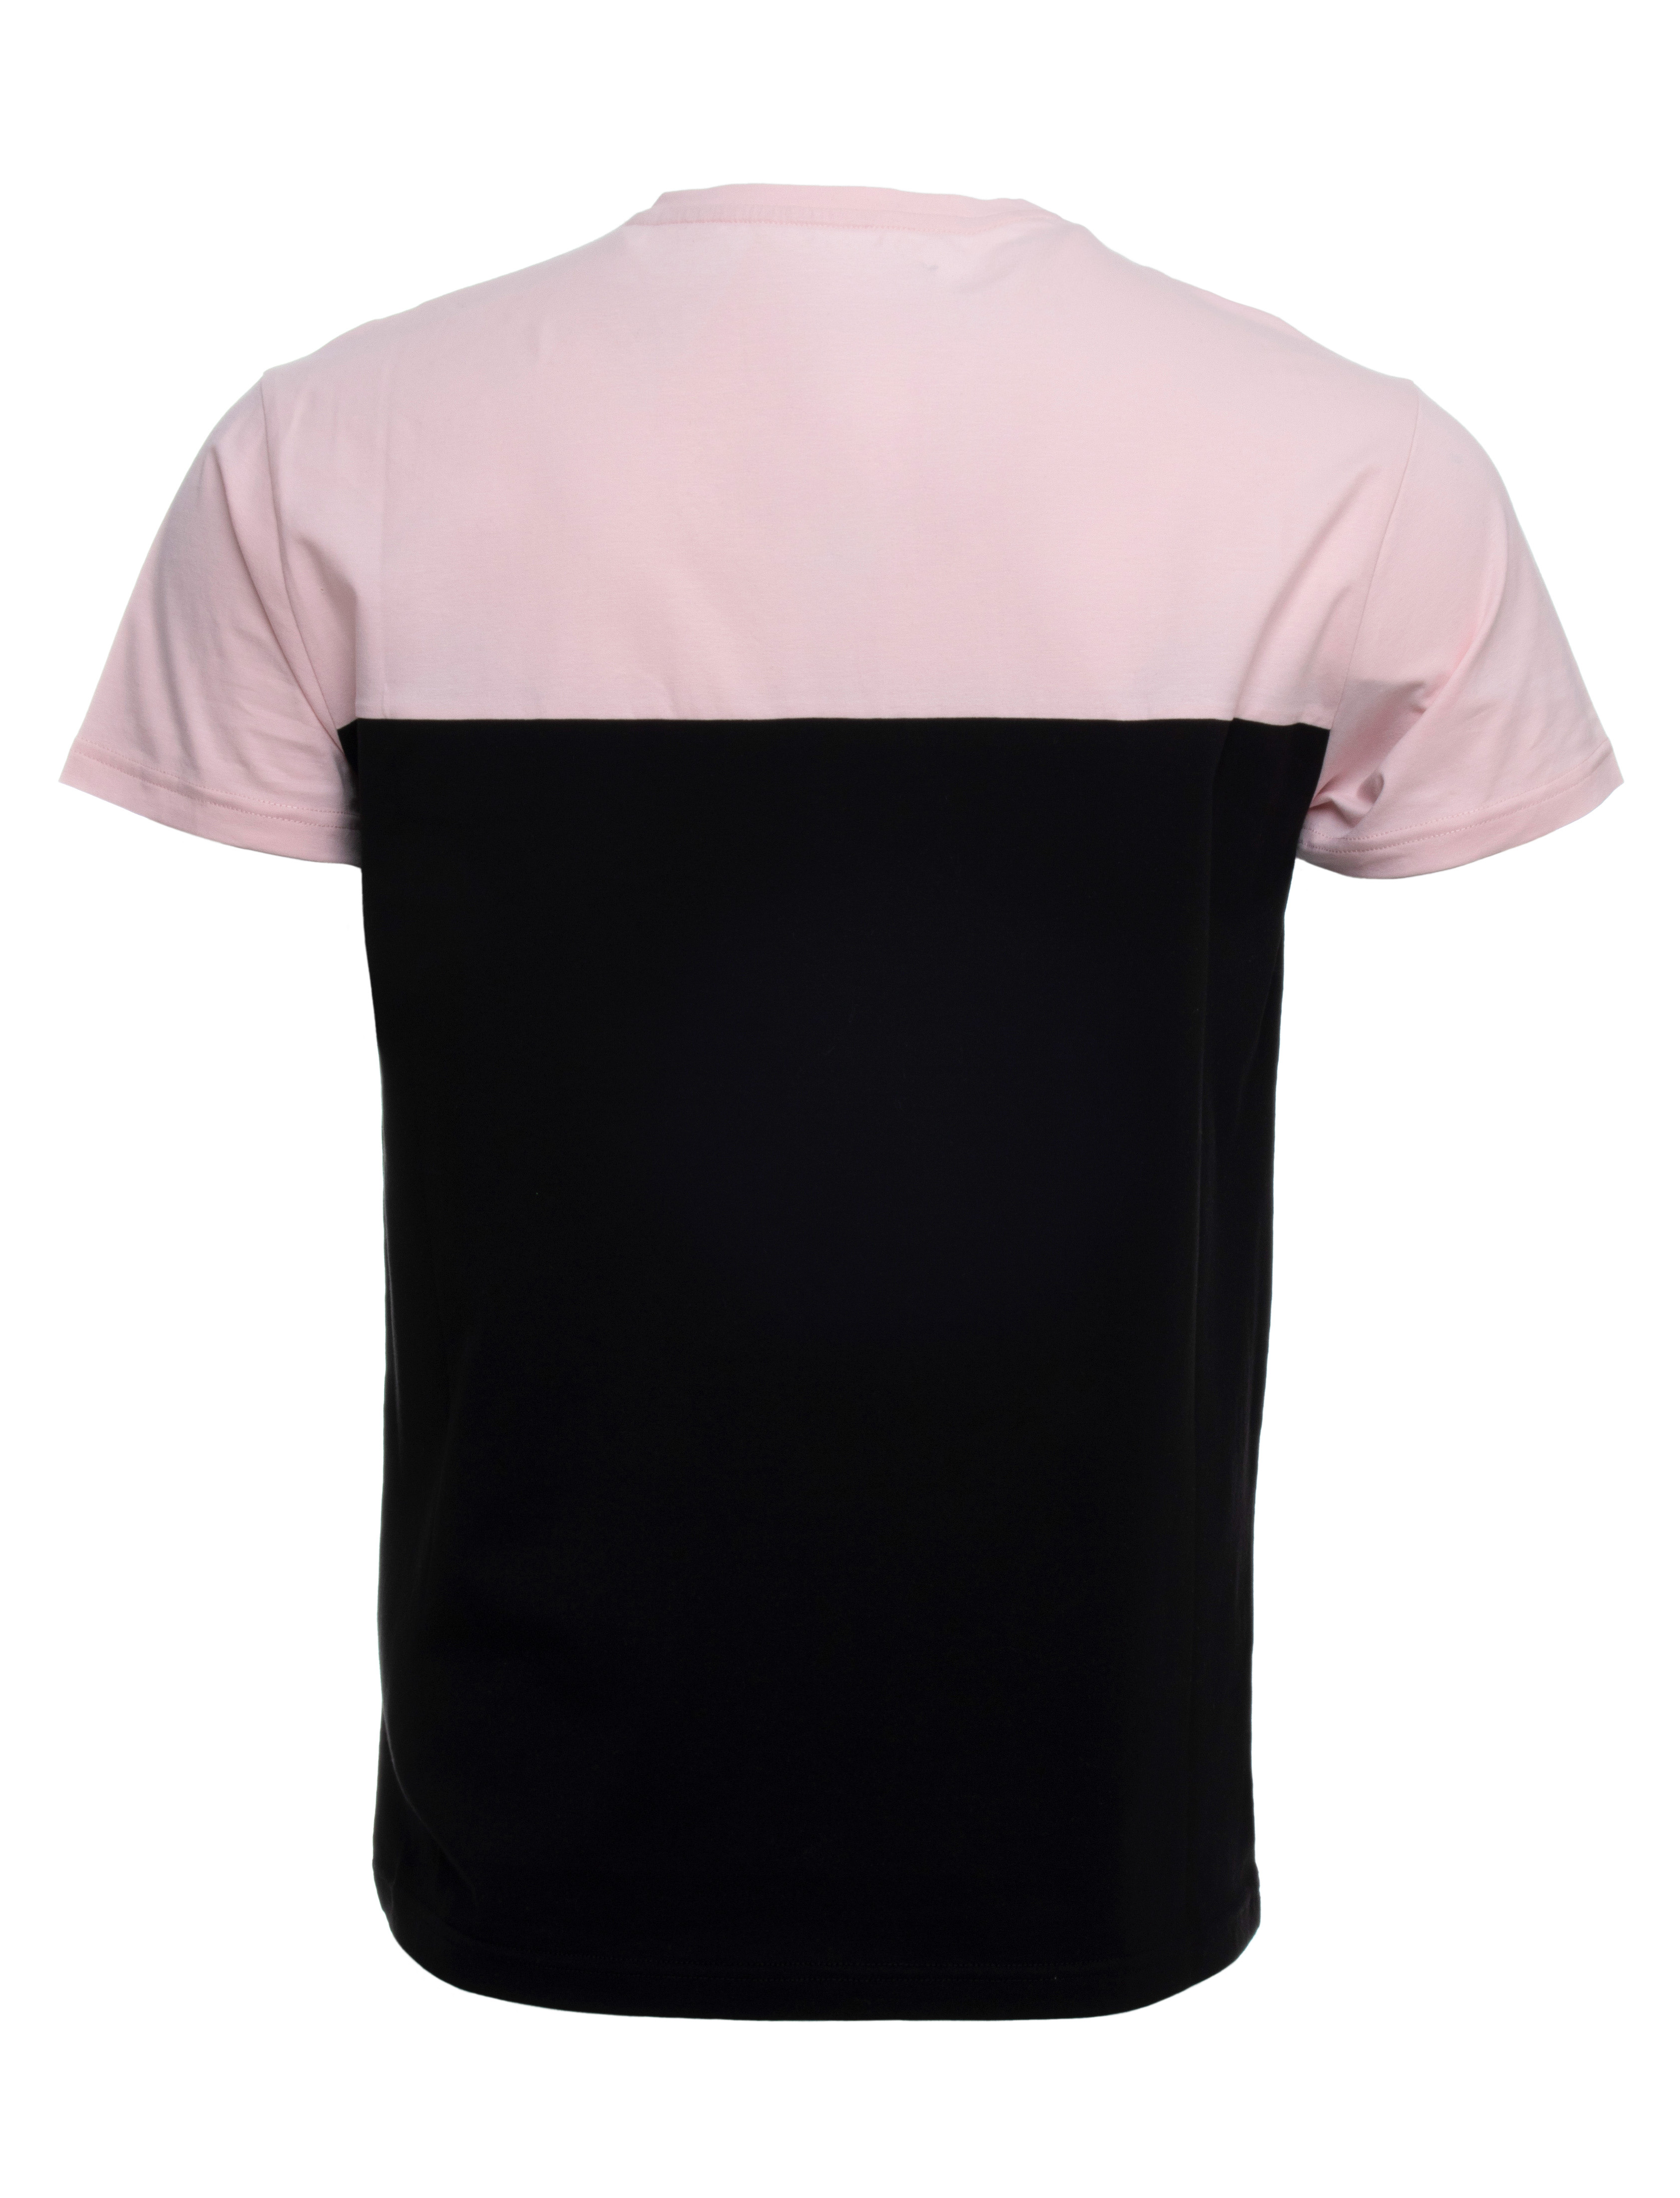 X RAY Men's Soft Stretch Cotton Solid Colorblock Short Sleeve V-Neck Slim Fit T-Shirt, Fashion Sport Casual Tee for Men, Black/Baby Pink Size Medium - image 2 of 4